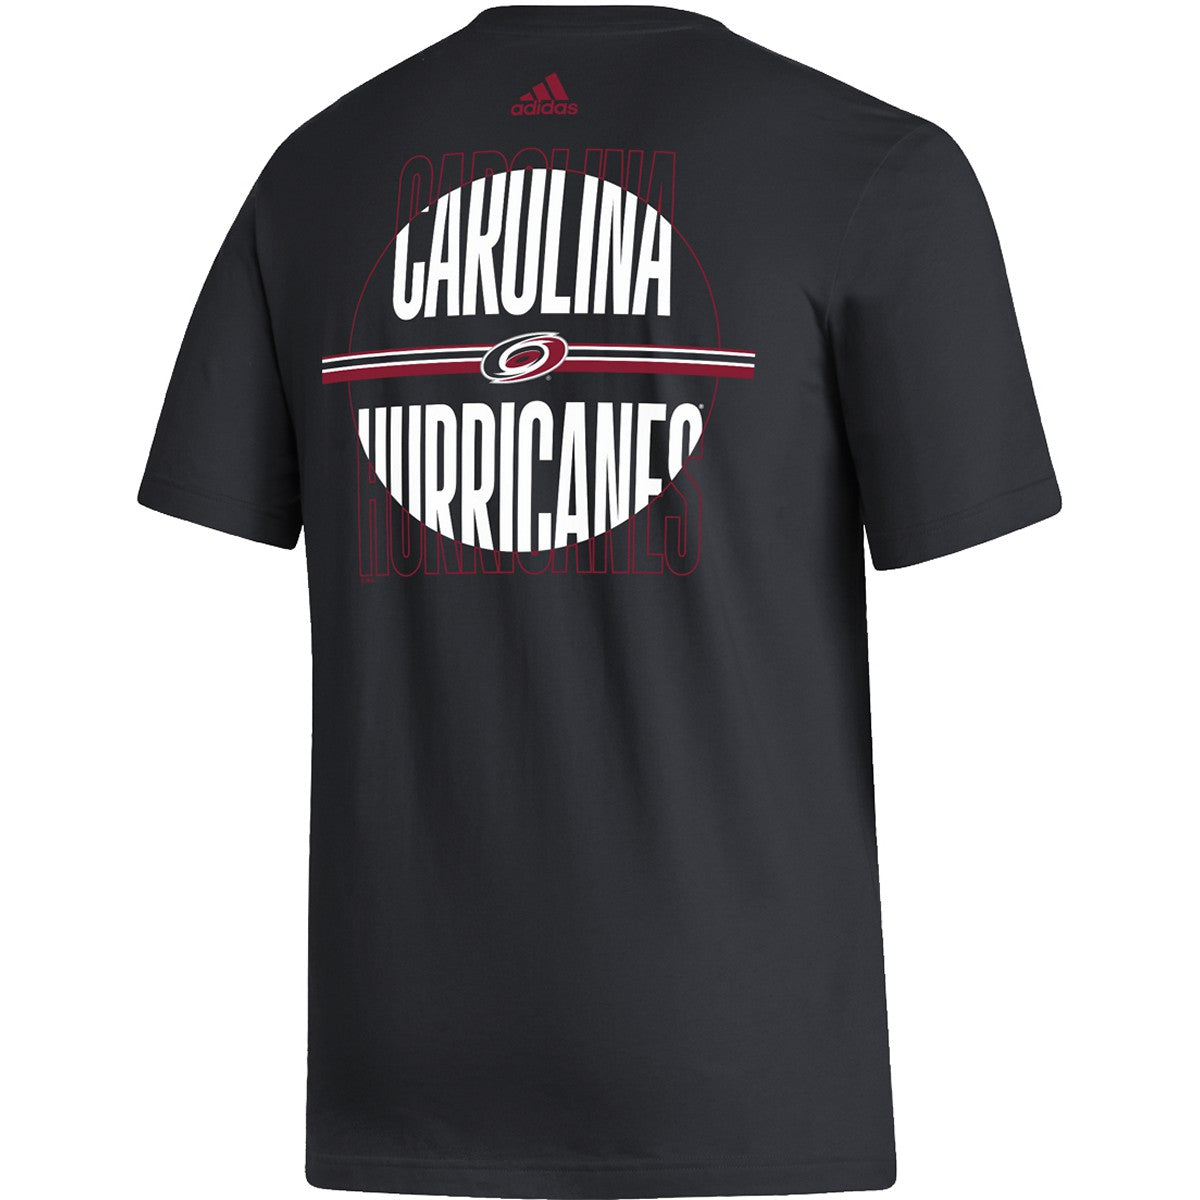 Back View: Black tee with Carolina Hurricanes graphic and red Adidas logo.